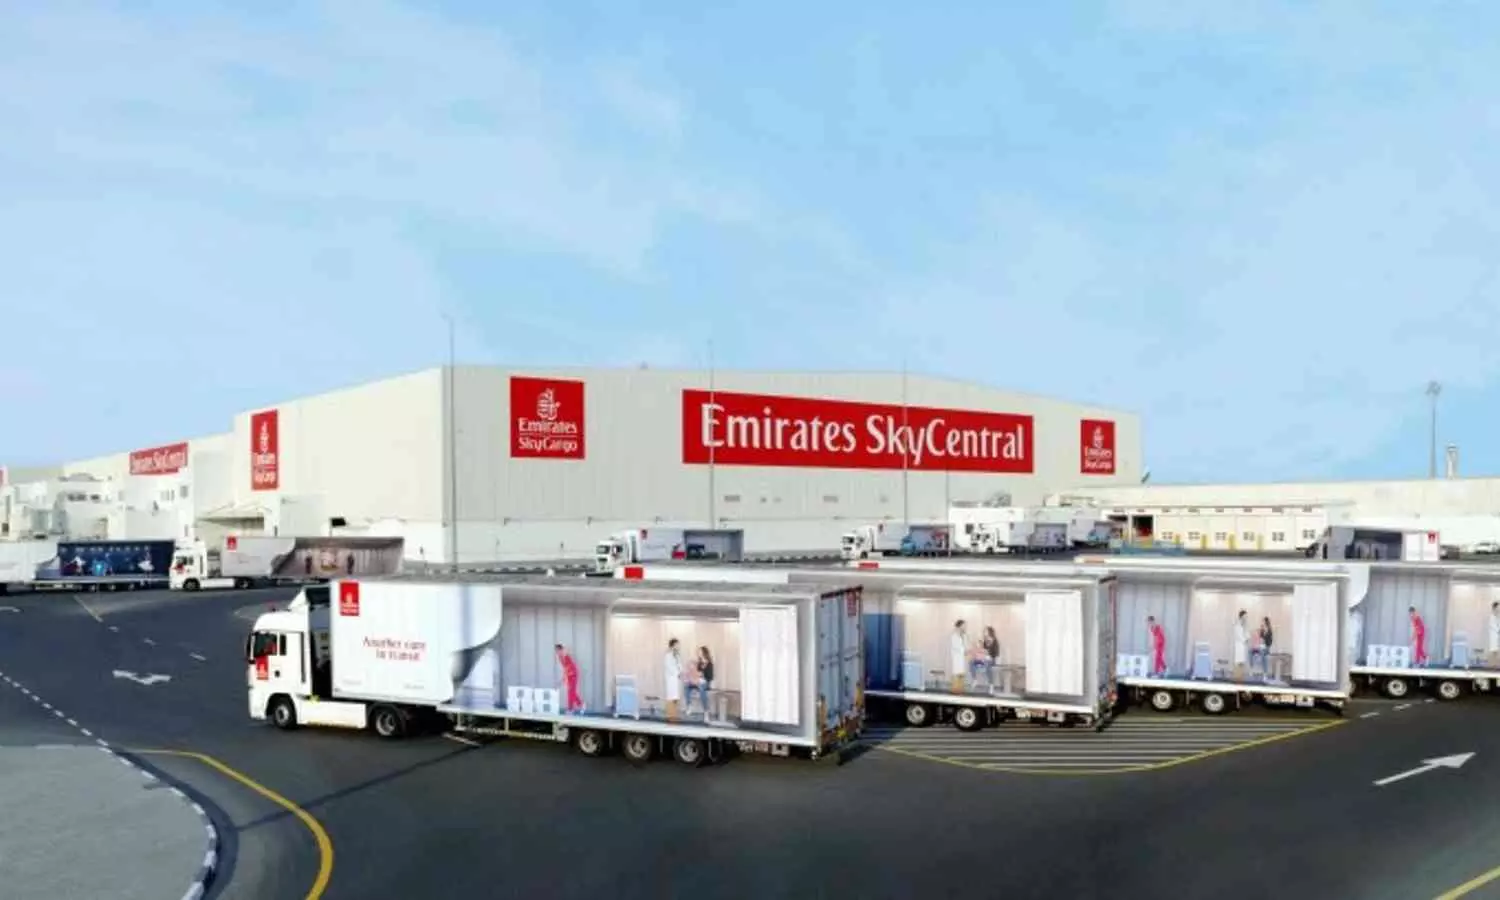 Emirates SkyCentral DWC will be fully reactivated from 26 March 2022